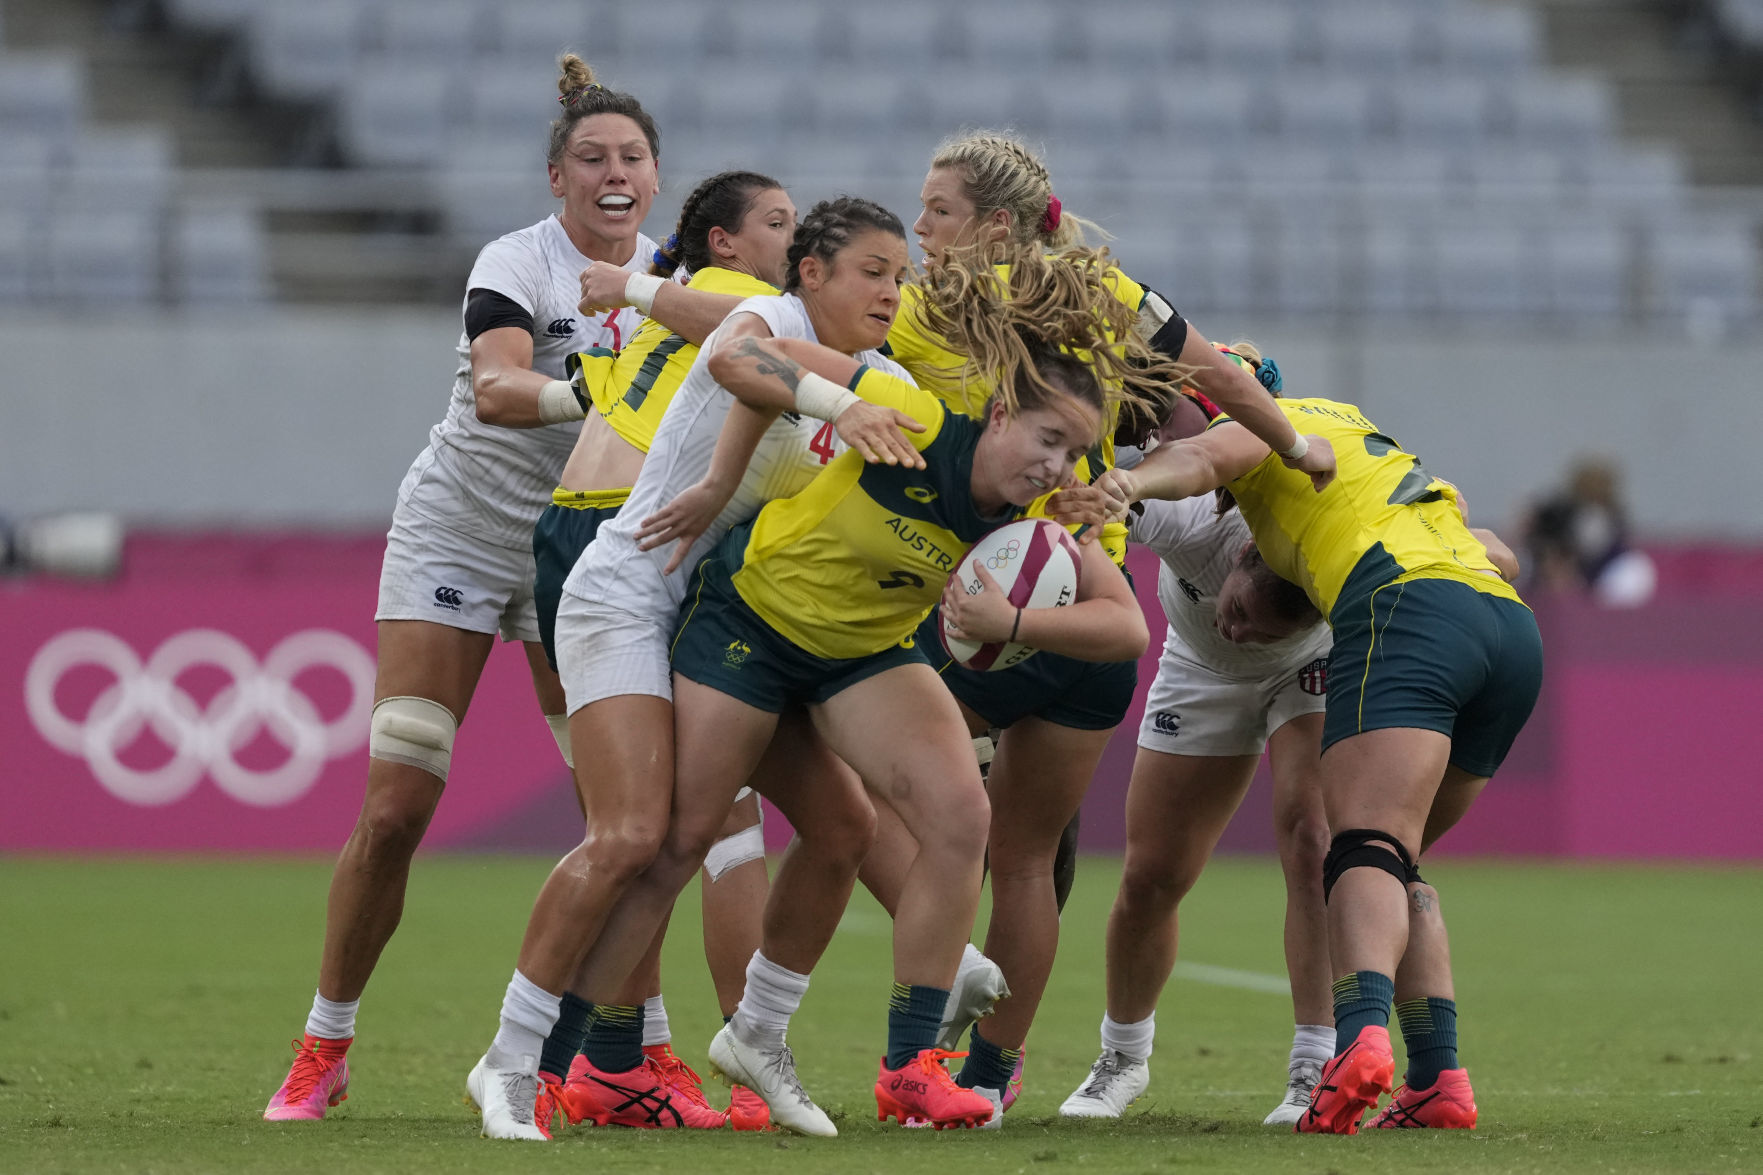 Team USA and Whitefishs Nicole Heavirland finish sixth in Tokyo Olympic rugby sevens